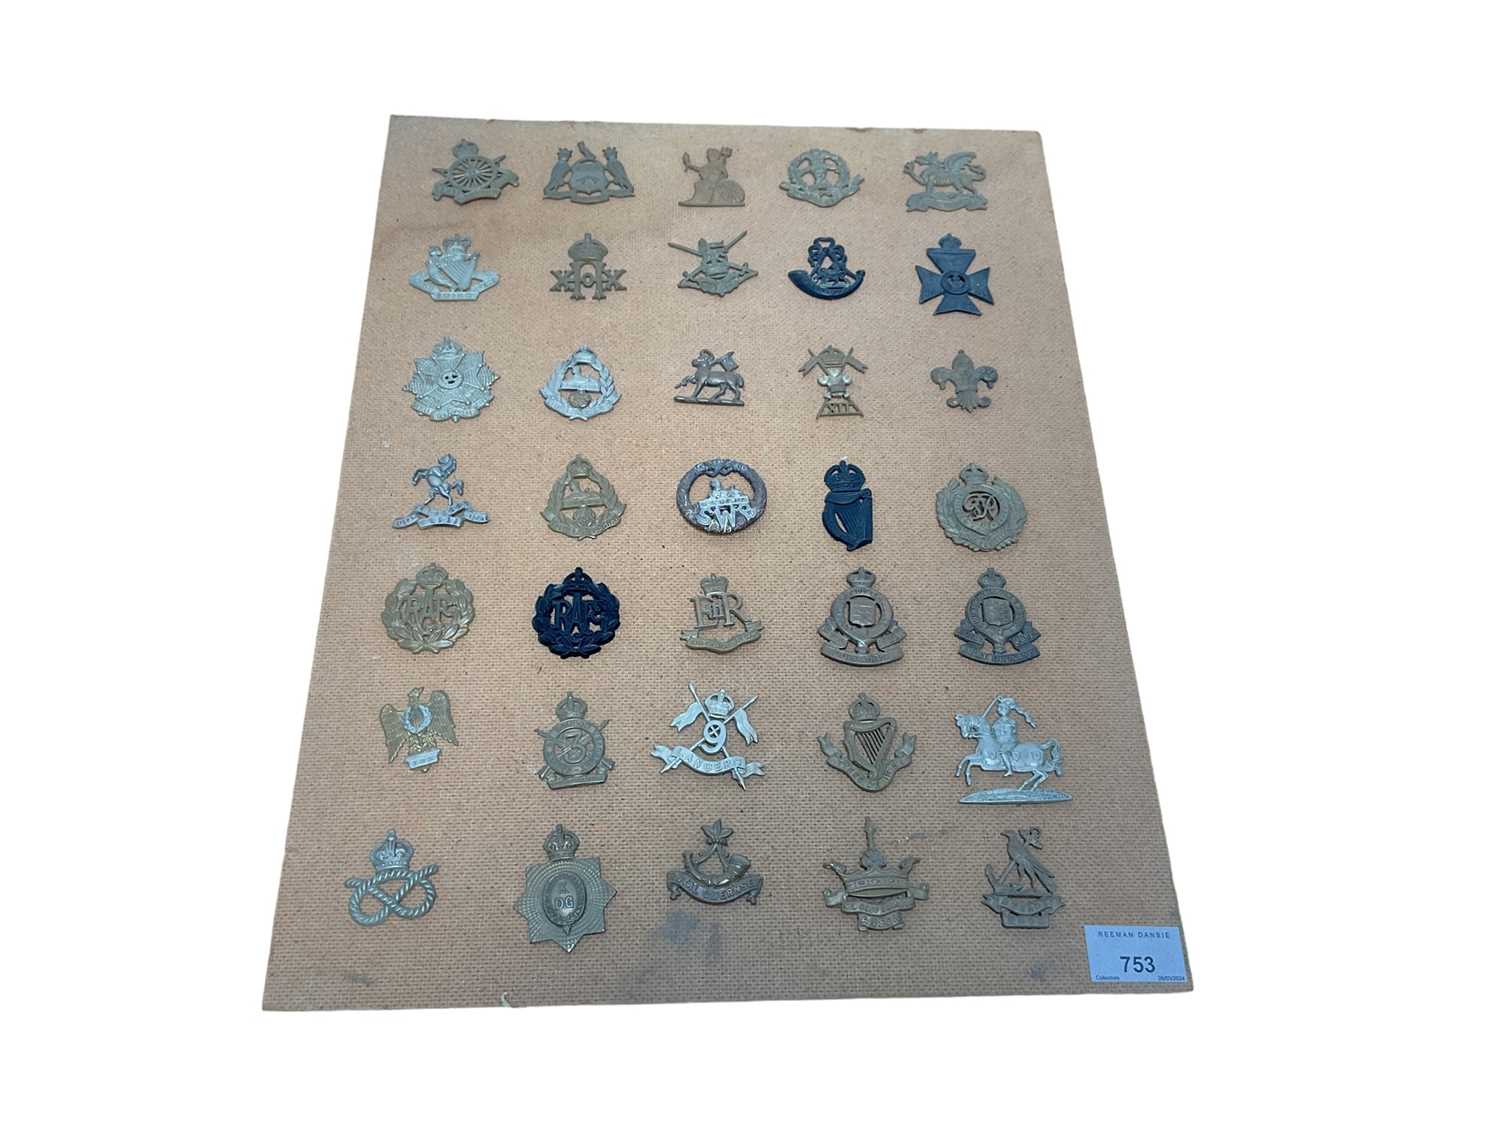 Lot 753 - Group of Thirty Five First World War, Second World War and later British military cap badges to include Second World War RAF Wartime economy issue. (35)